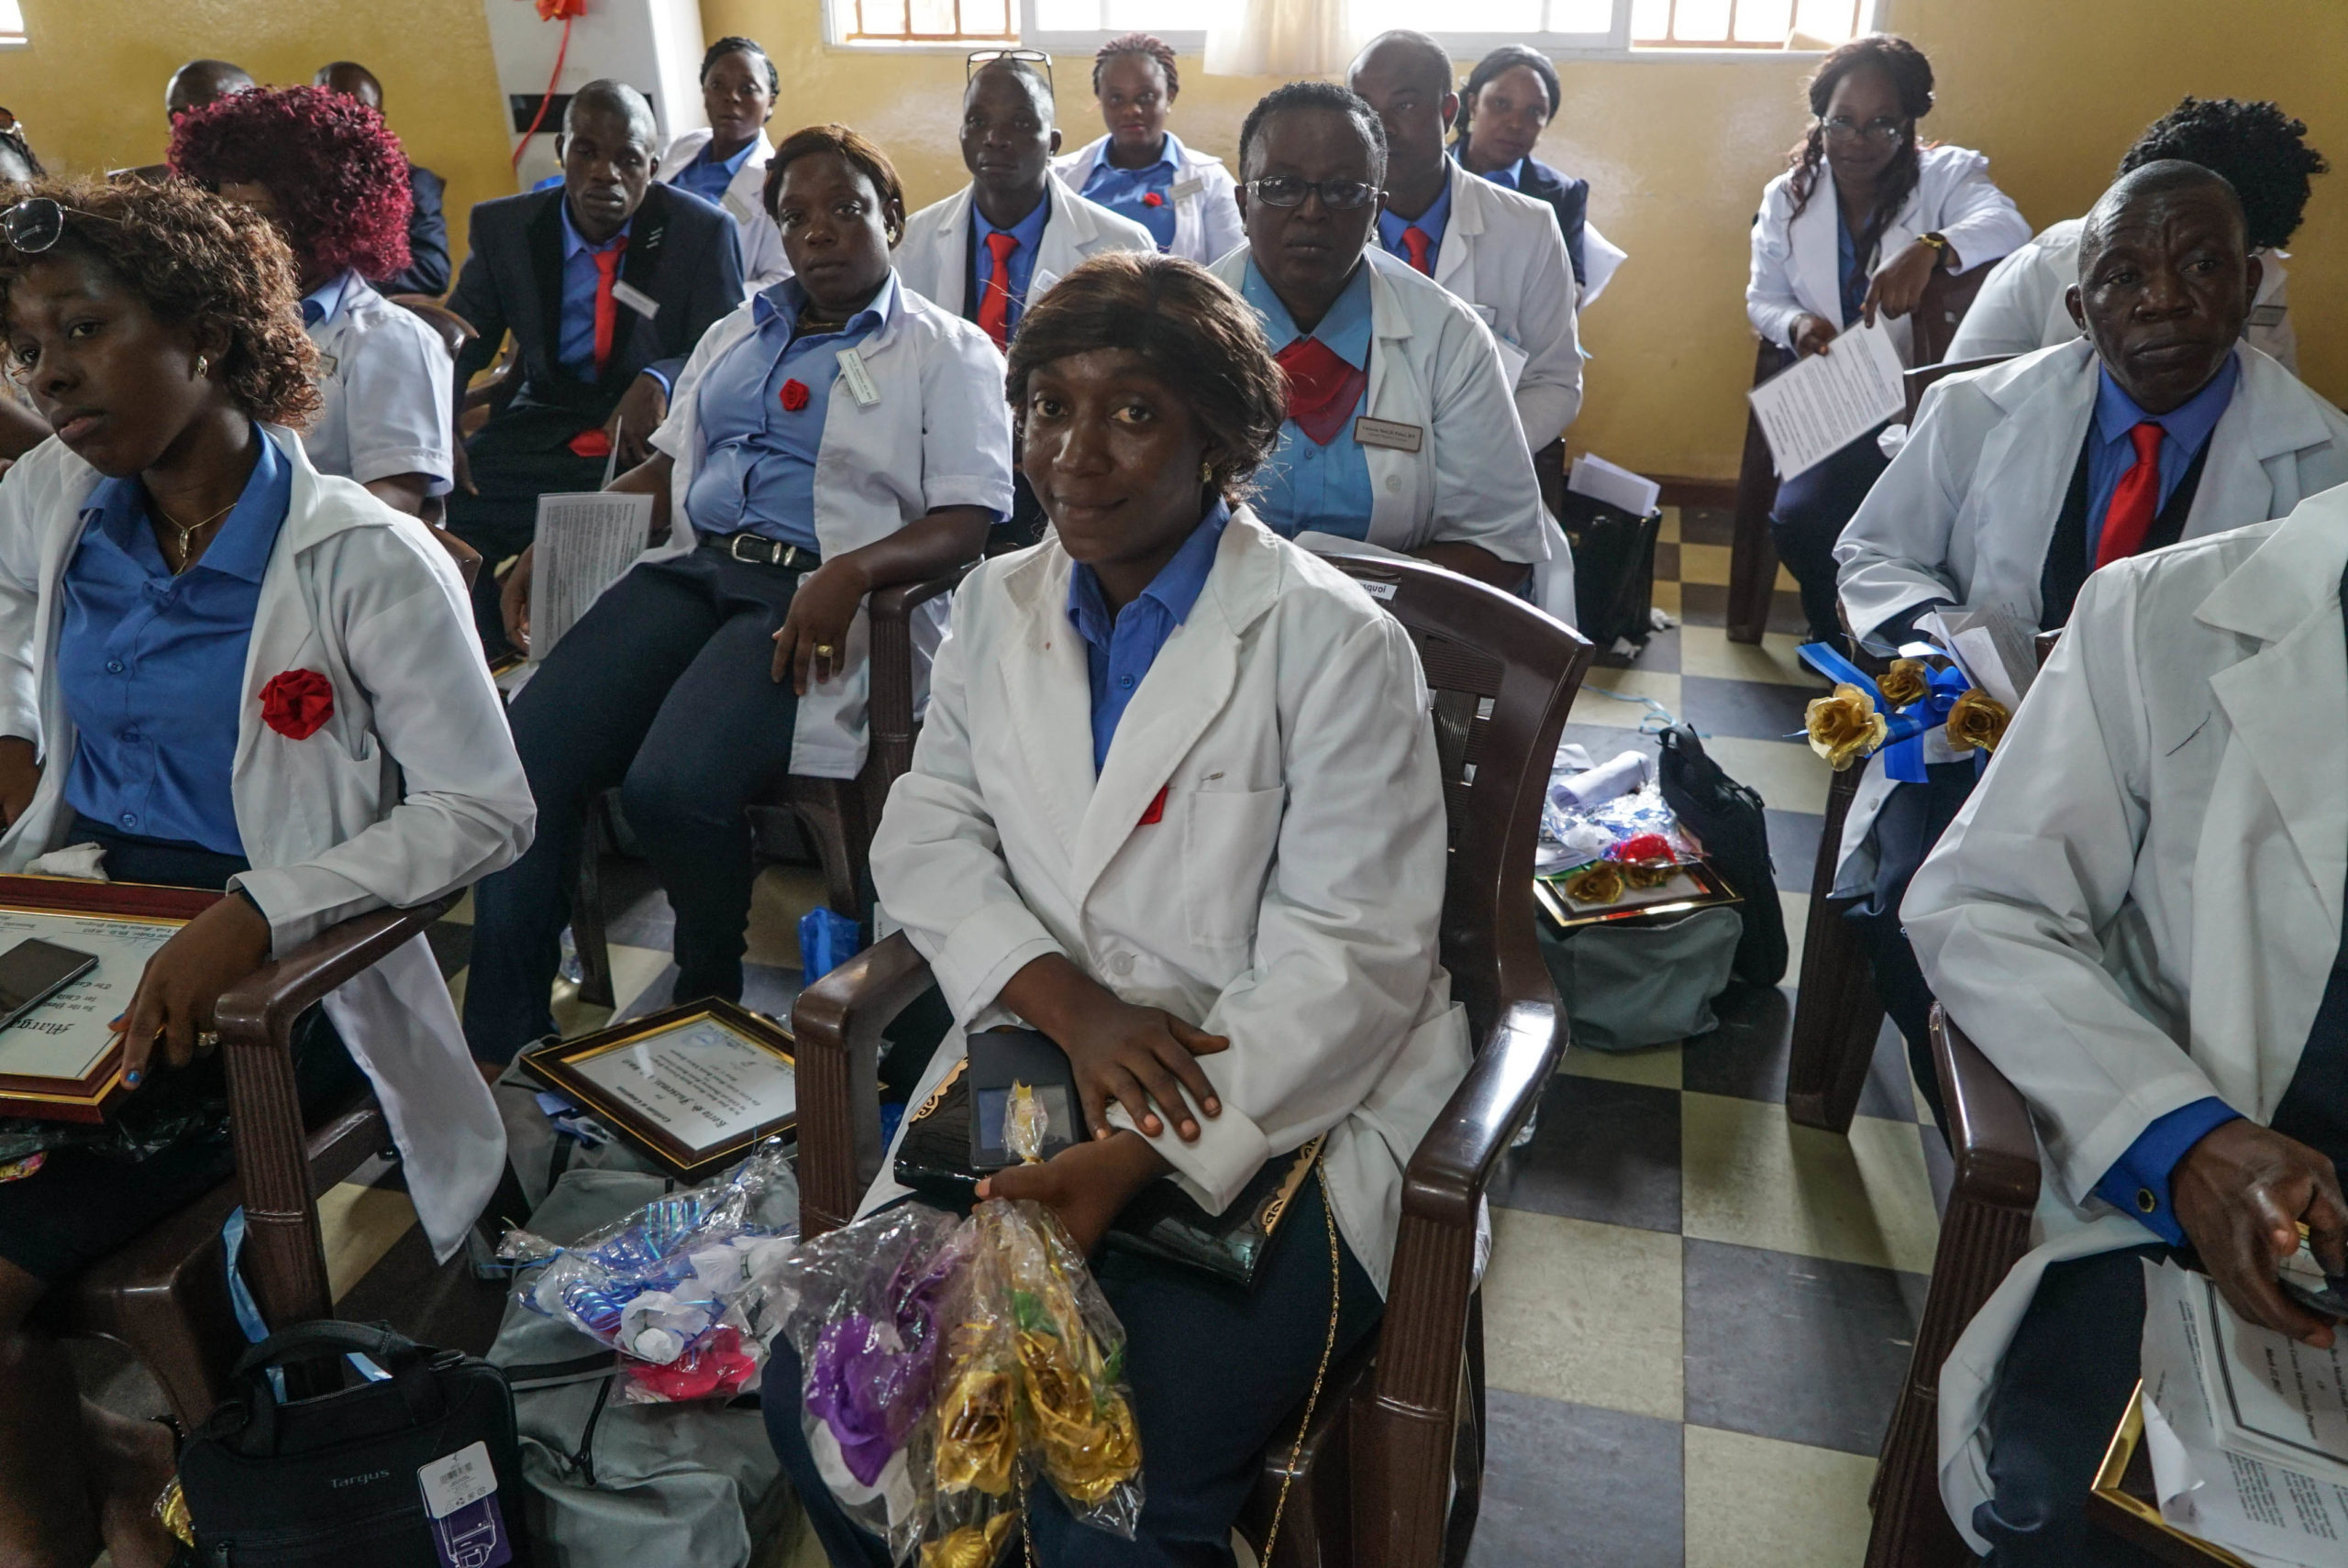 Wideshot of mental health care workers in Liberia at graduation